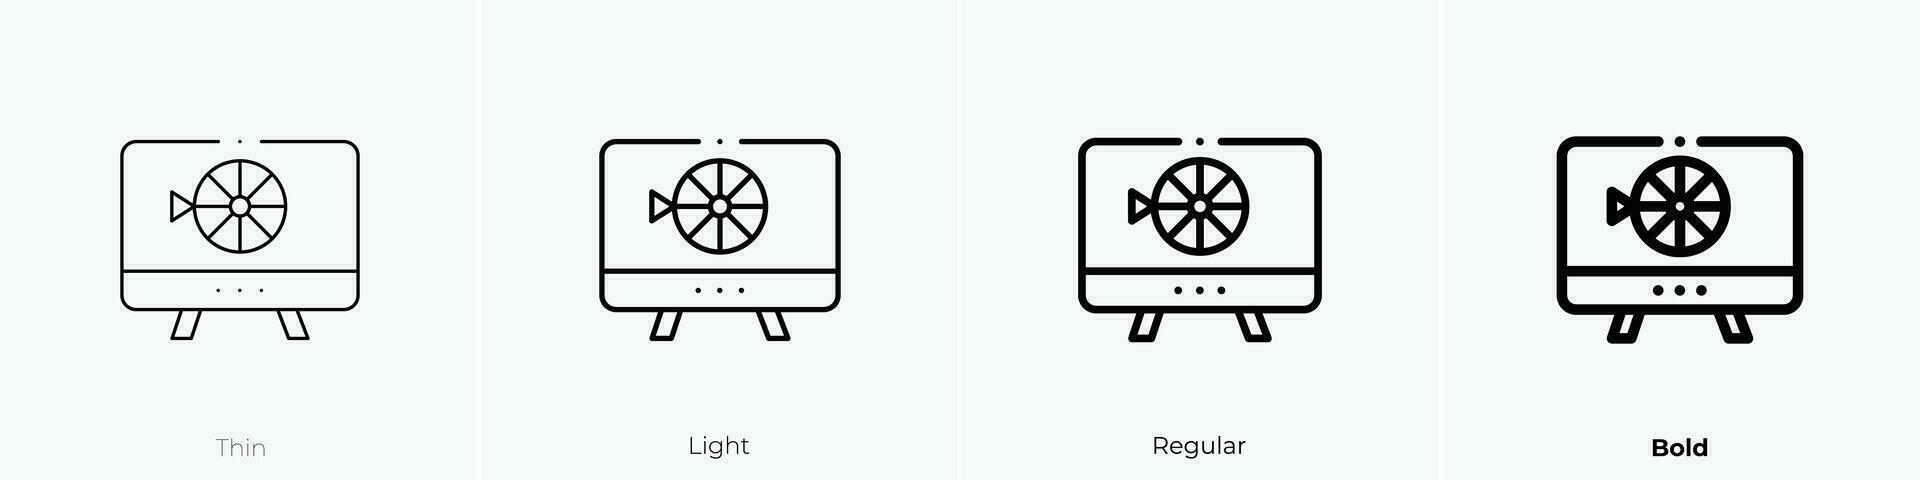 wheel of fortune icon. Thin, Light, Regular And Bold style design isolated on white background vector